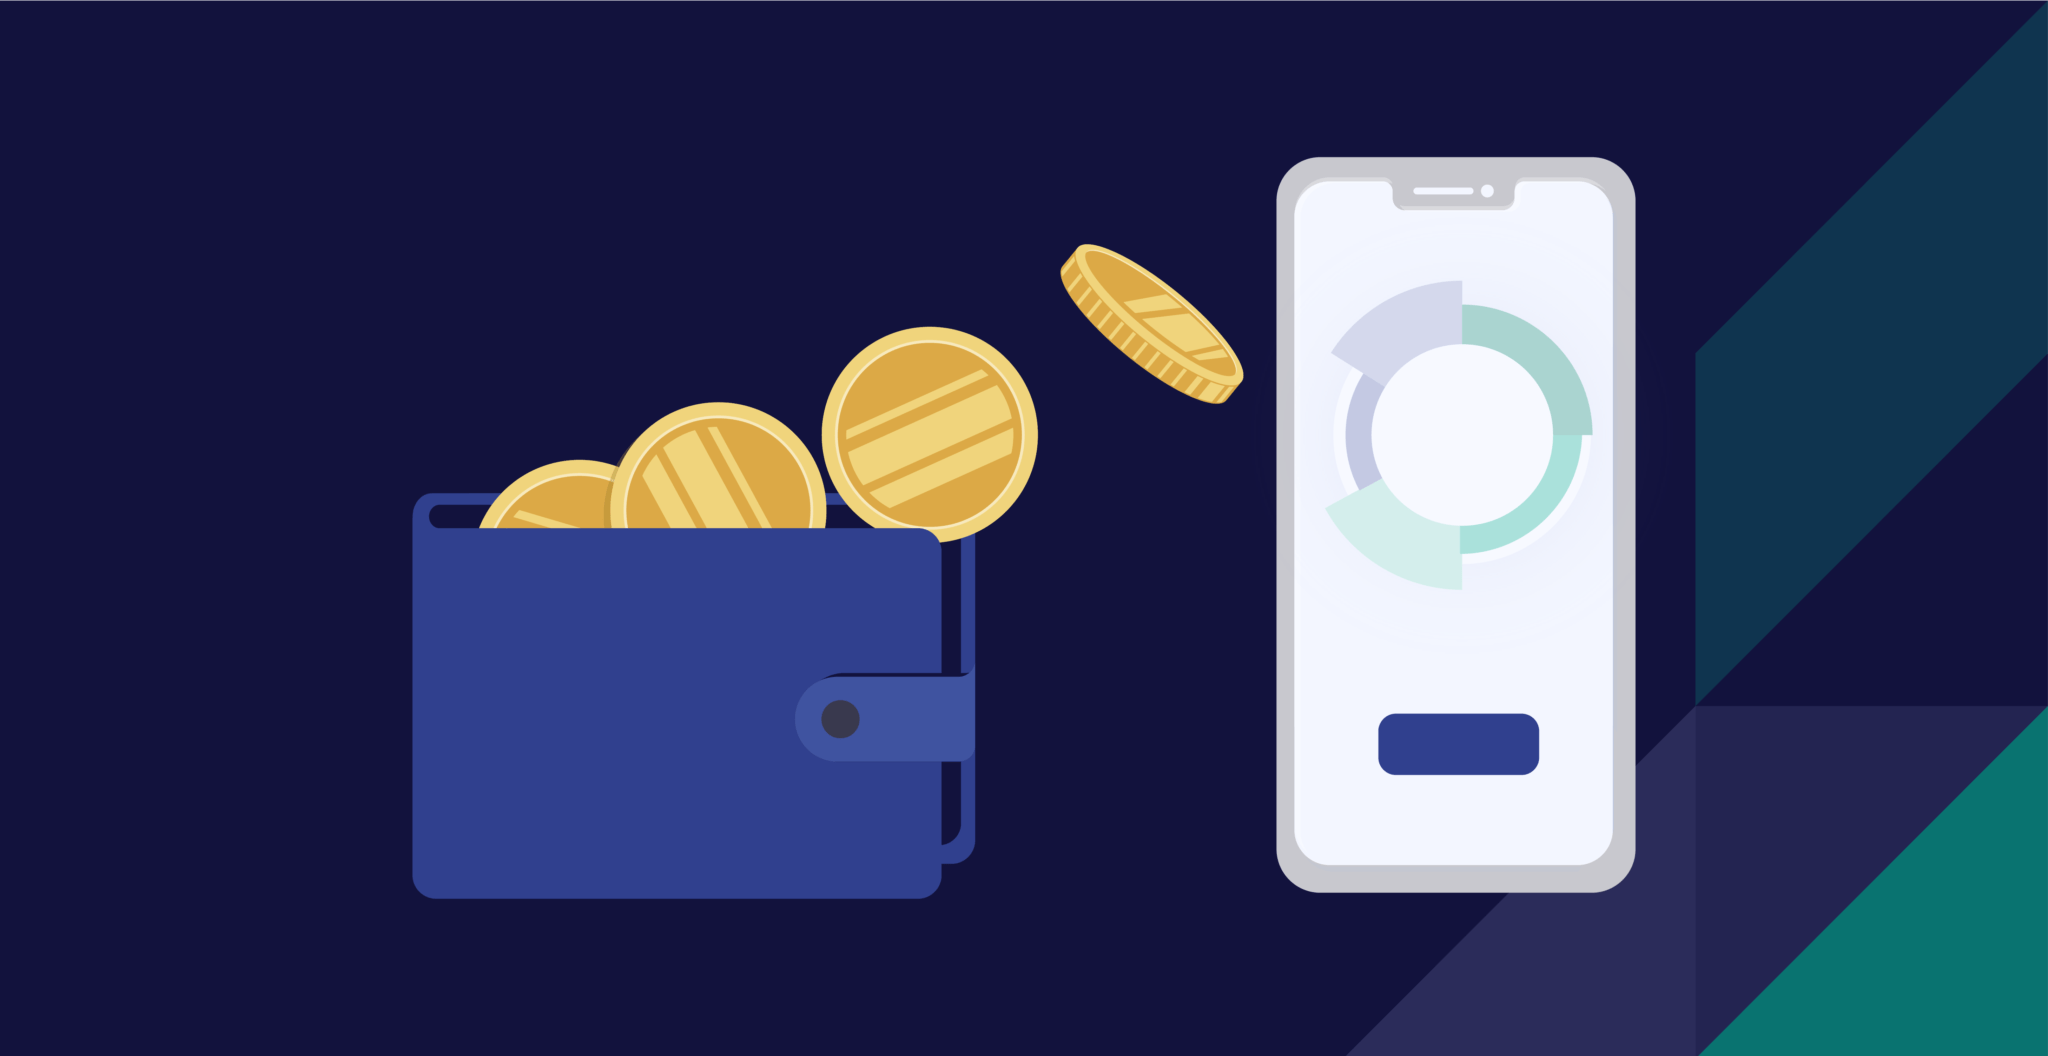 Coins flowing from wallet to M1 app